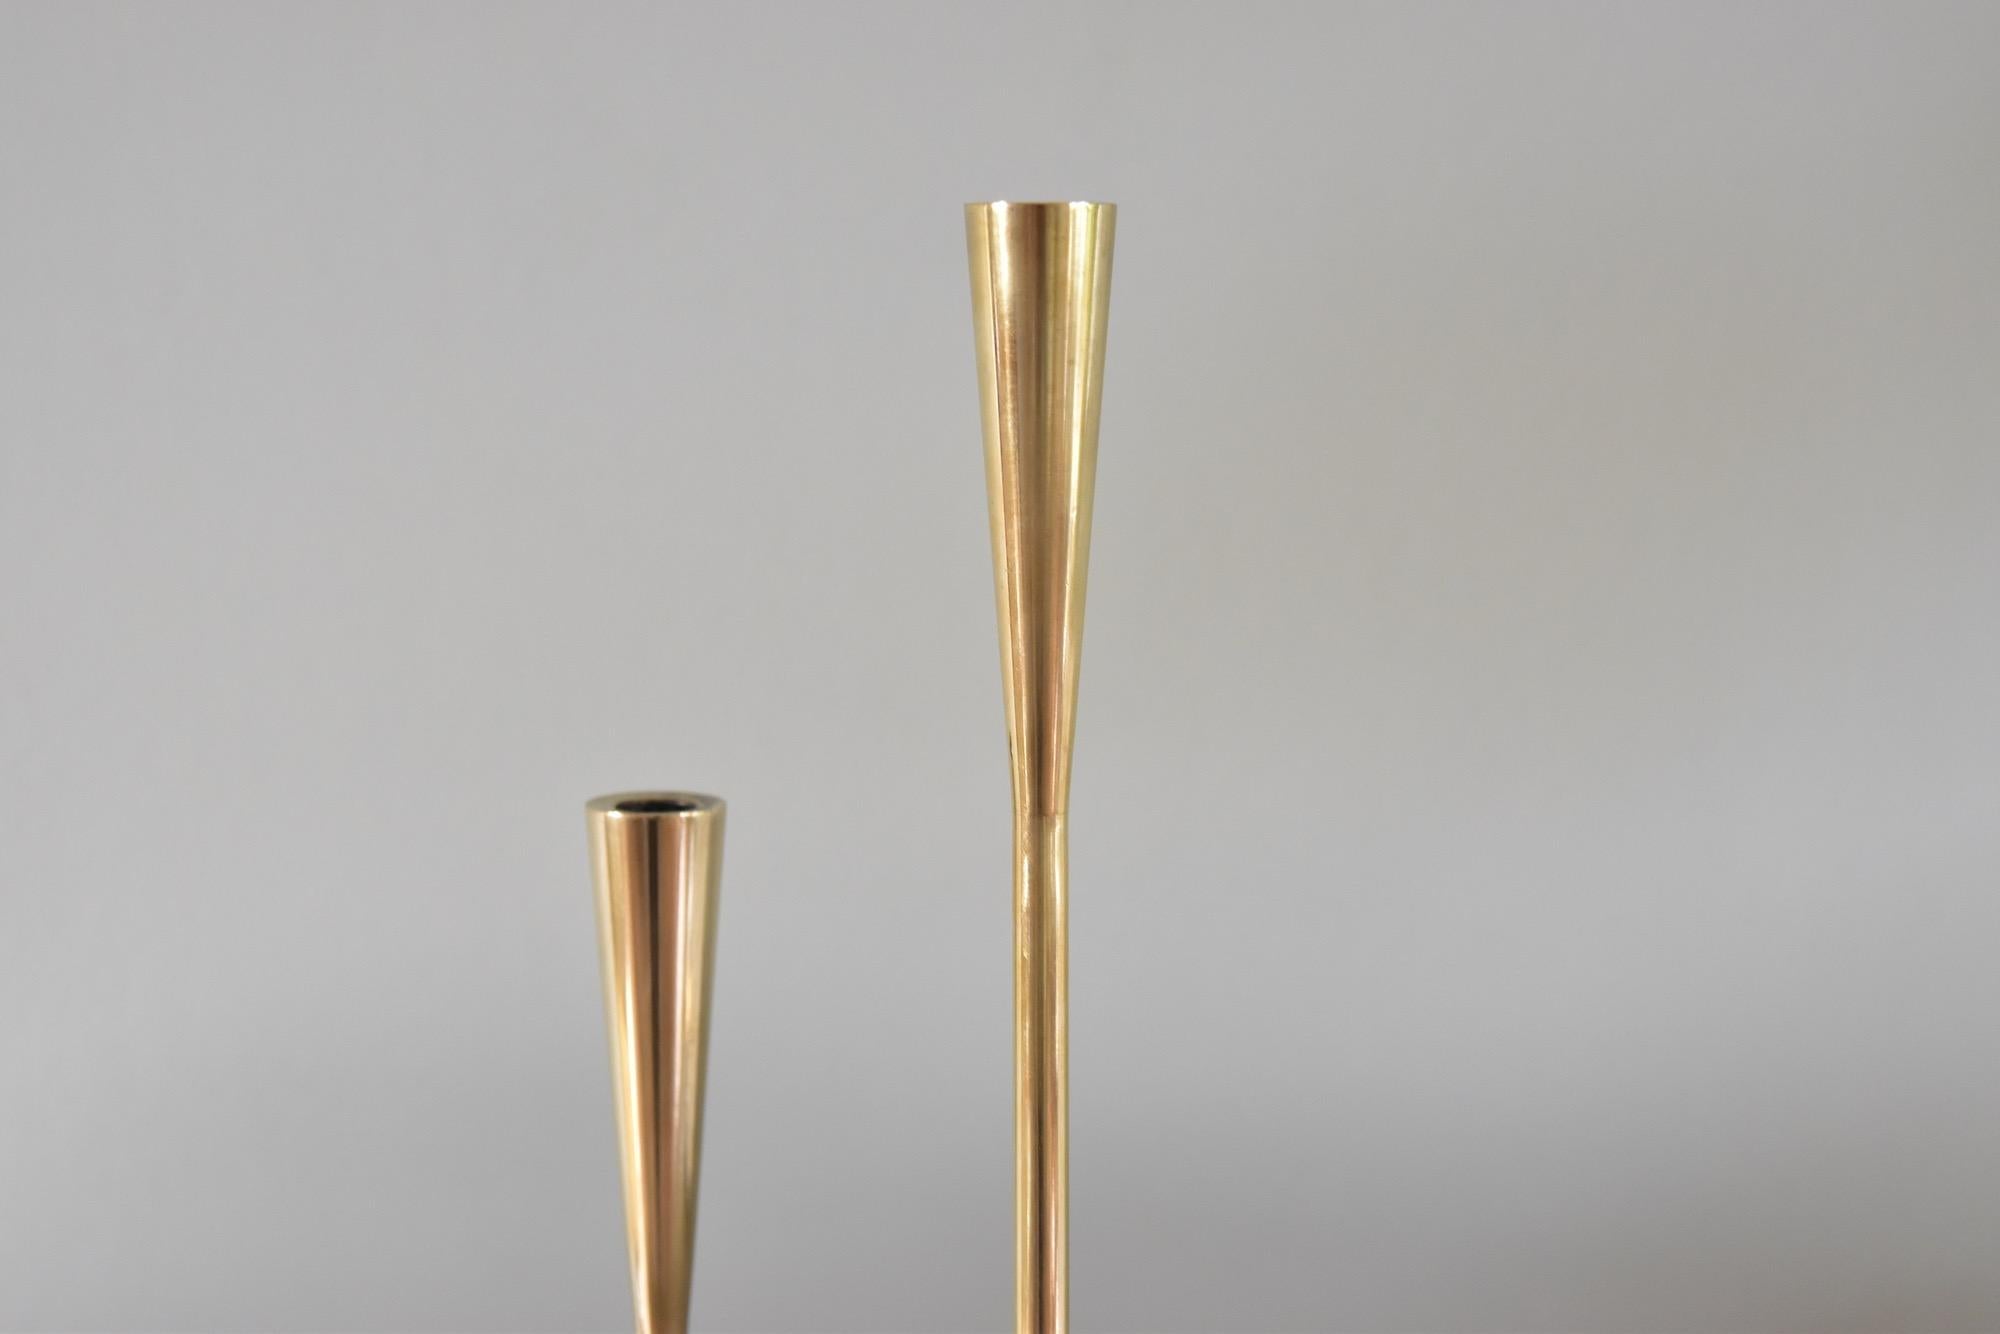 Large serpentine form candlesticks in solid brass by Illums Bolighus Copenhagen Denmark.
Price for one candleholder.